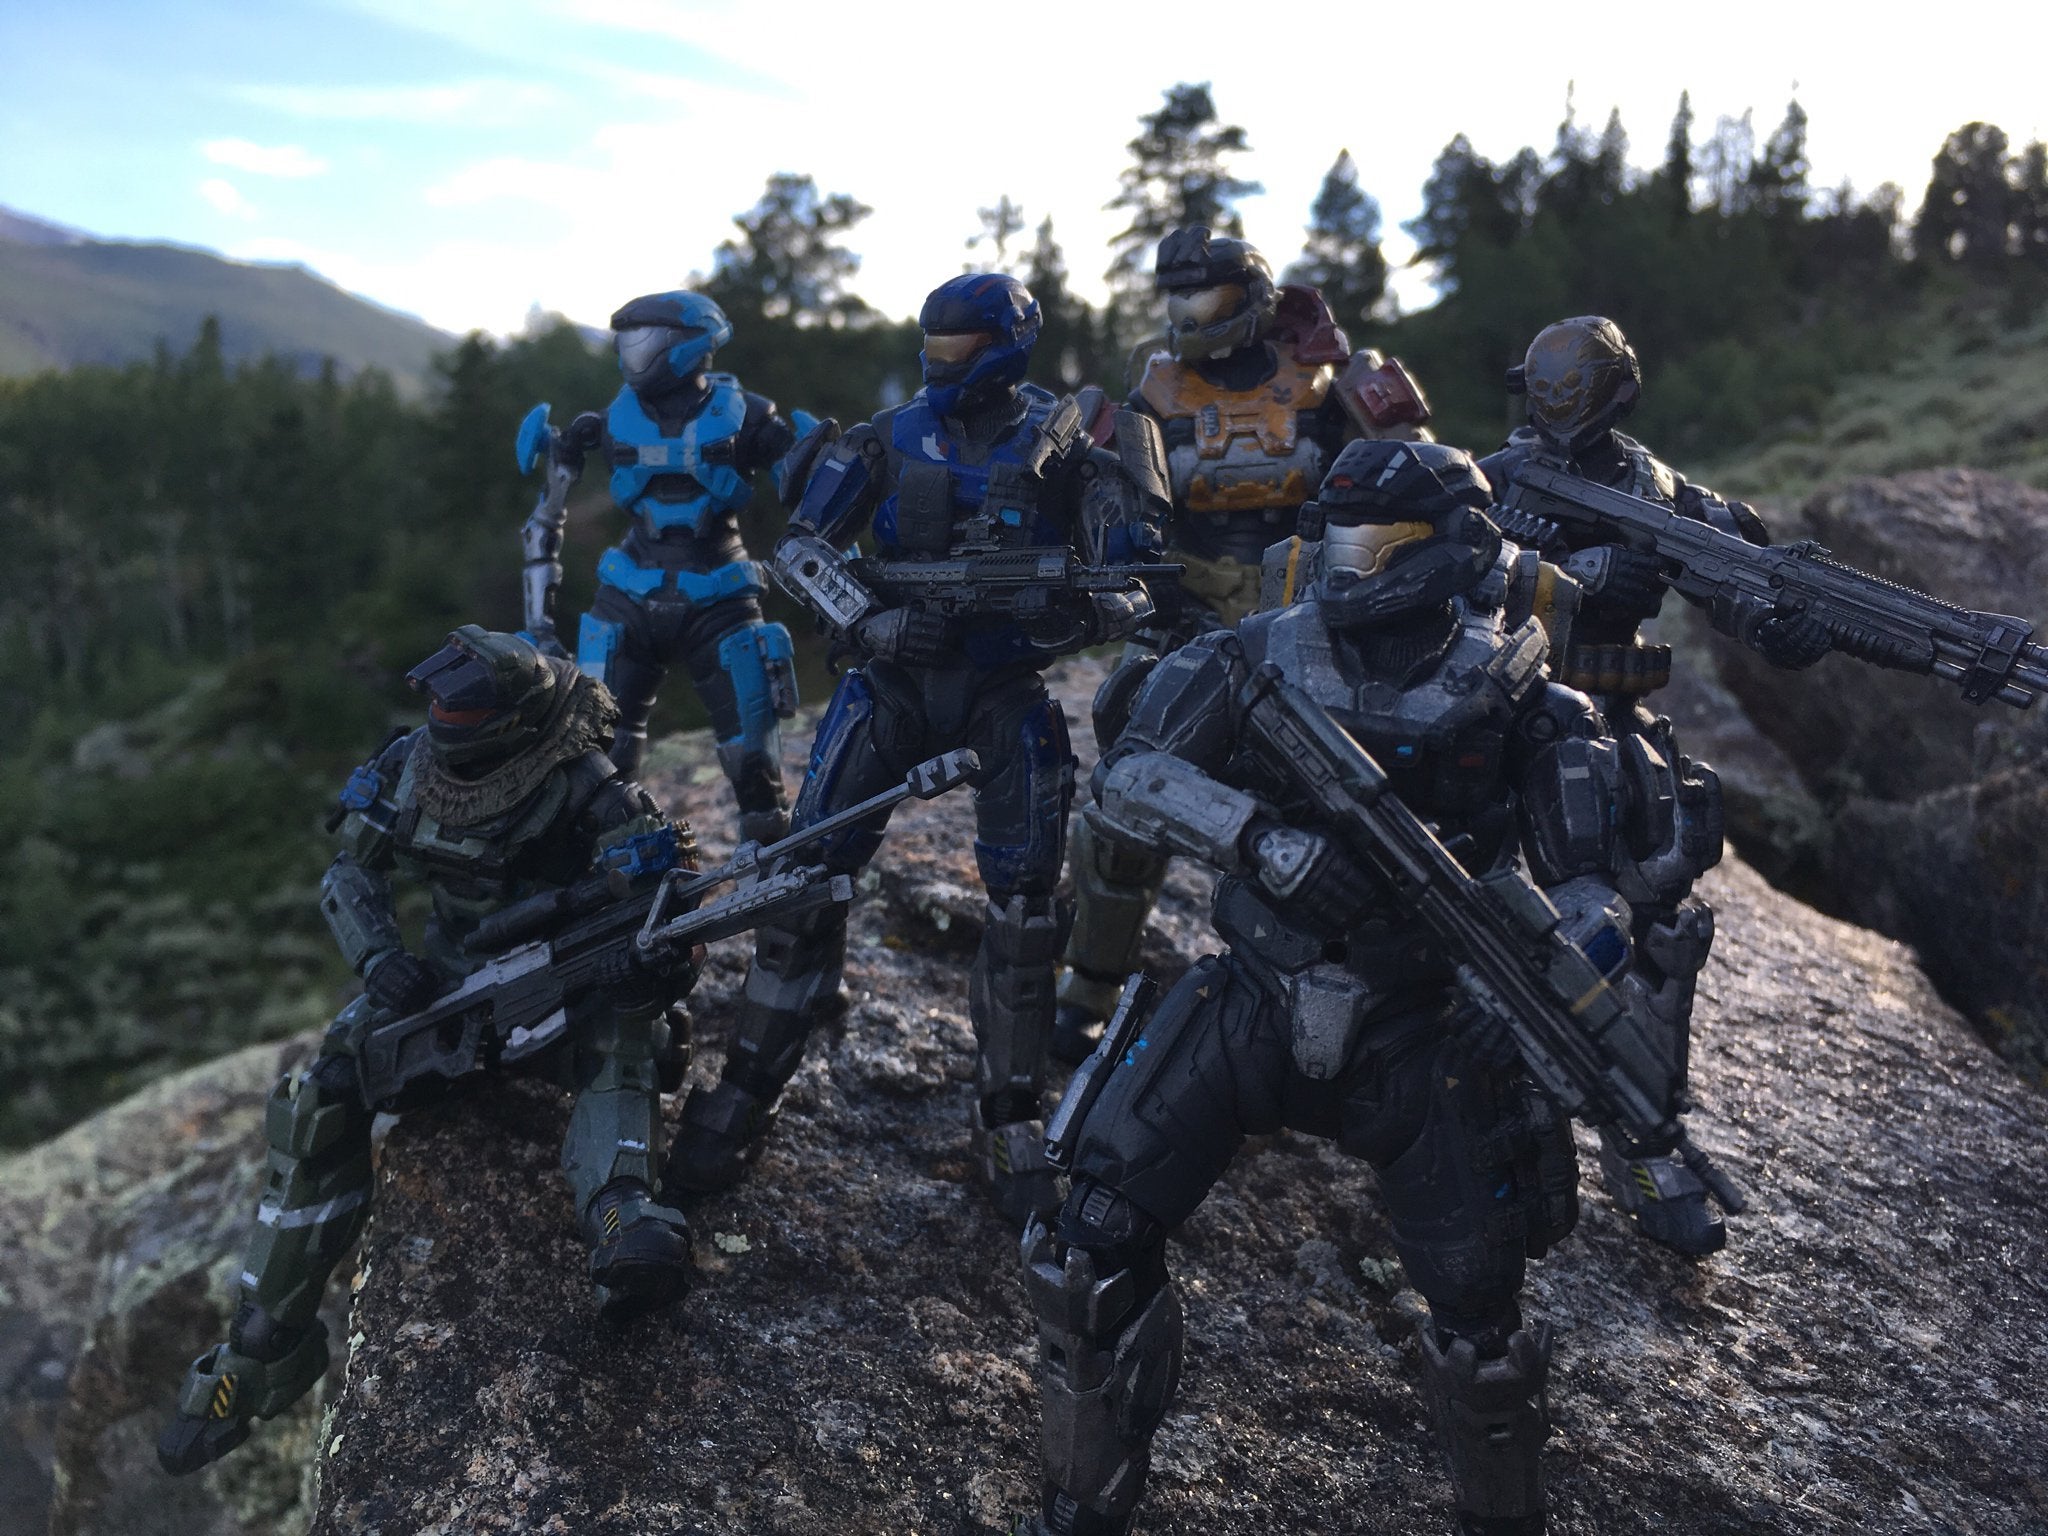 Happy Birthday Halo Reach, And Noble Team too. I'm so thankful for this game